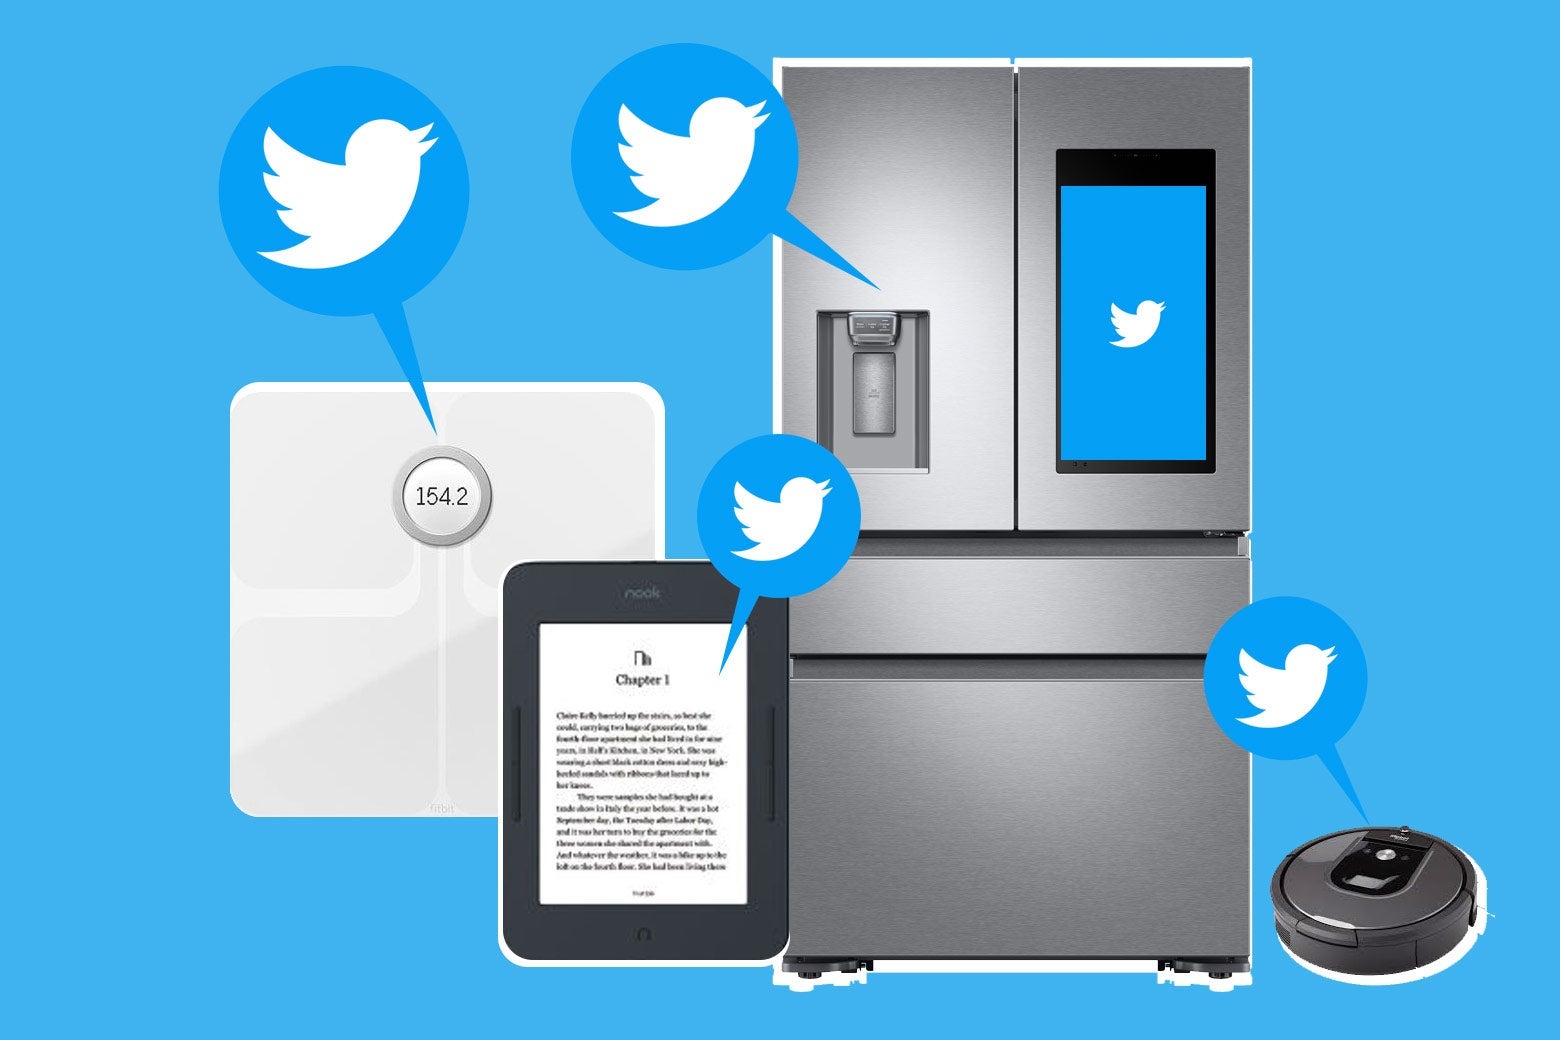 Photo illustration of objects you can tweet from: a scale, a fridge, a Roomba, a Kindle